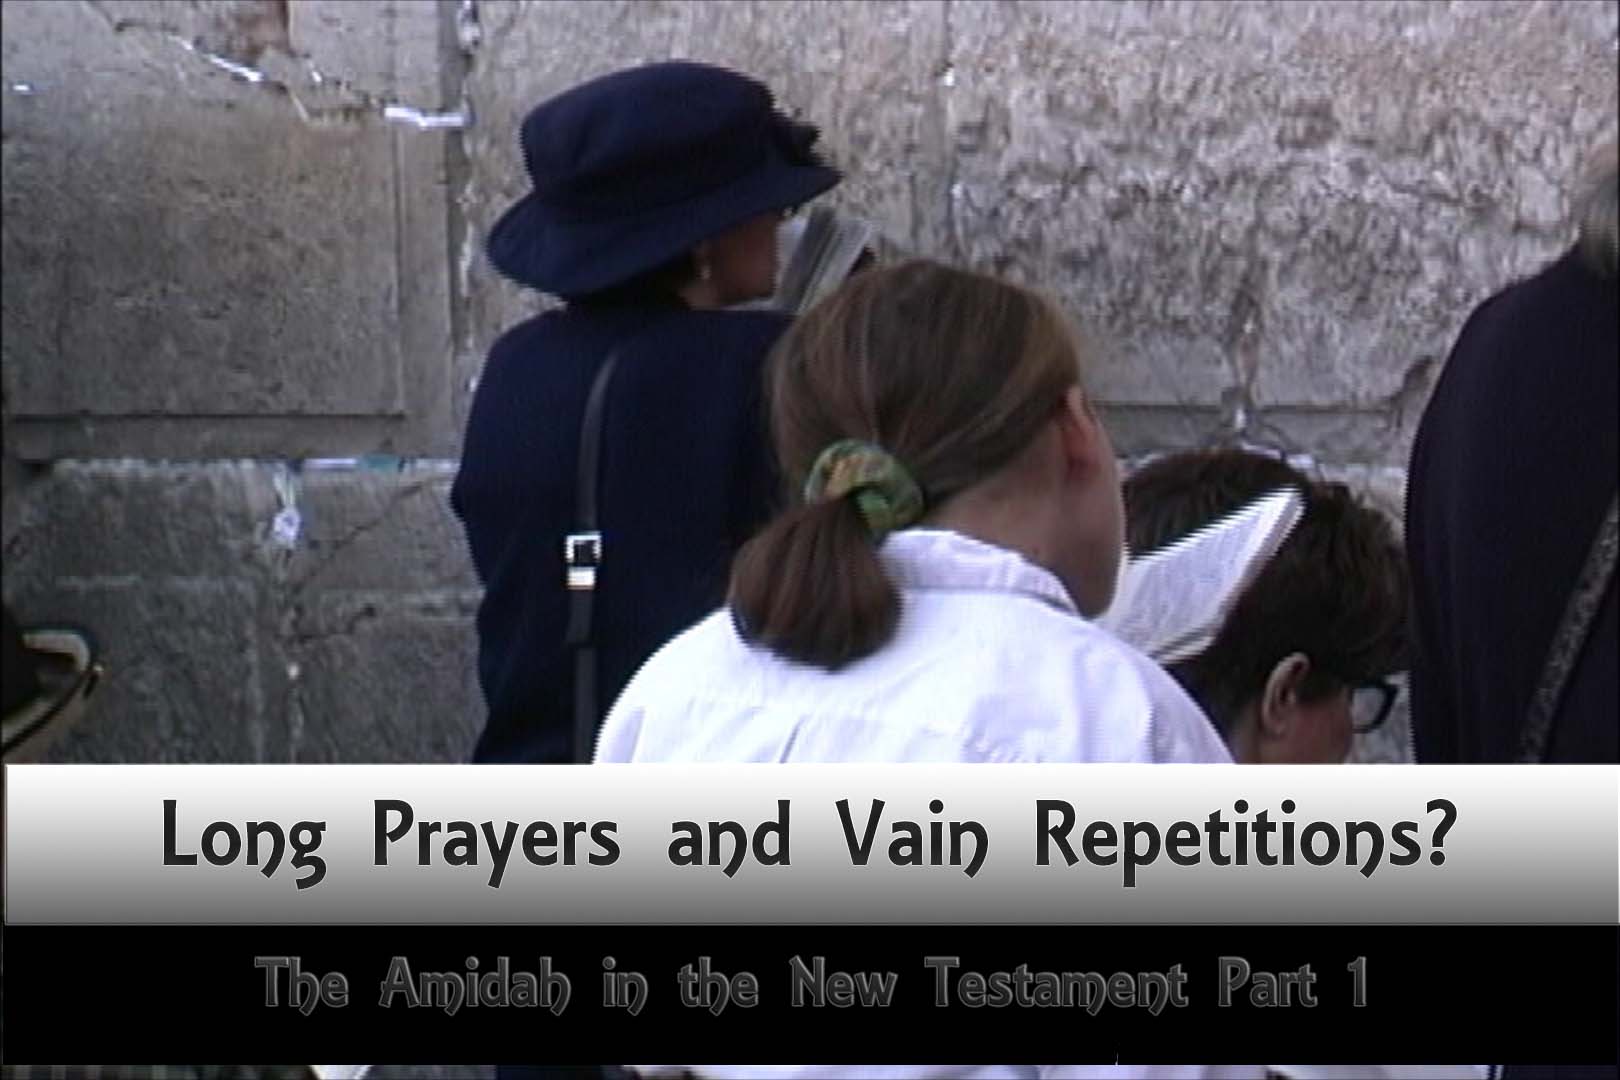 The Amidah and the New Testament I: Long Prayers and Vain Repetitions?